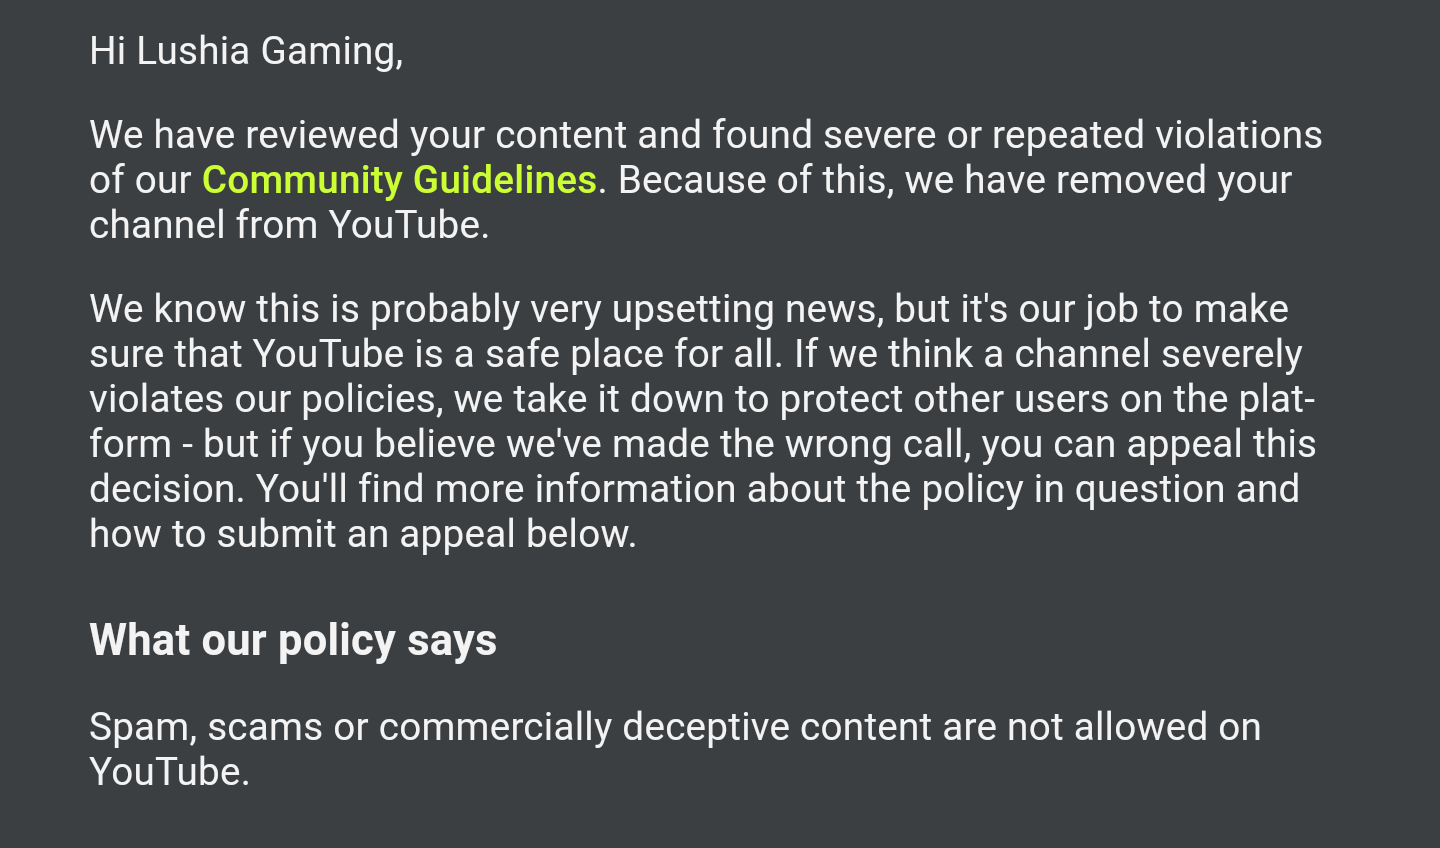 My small gaming channel was removed without warning, is it an error? YouTube,  I need human help. - YouTube Community